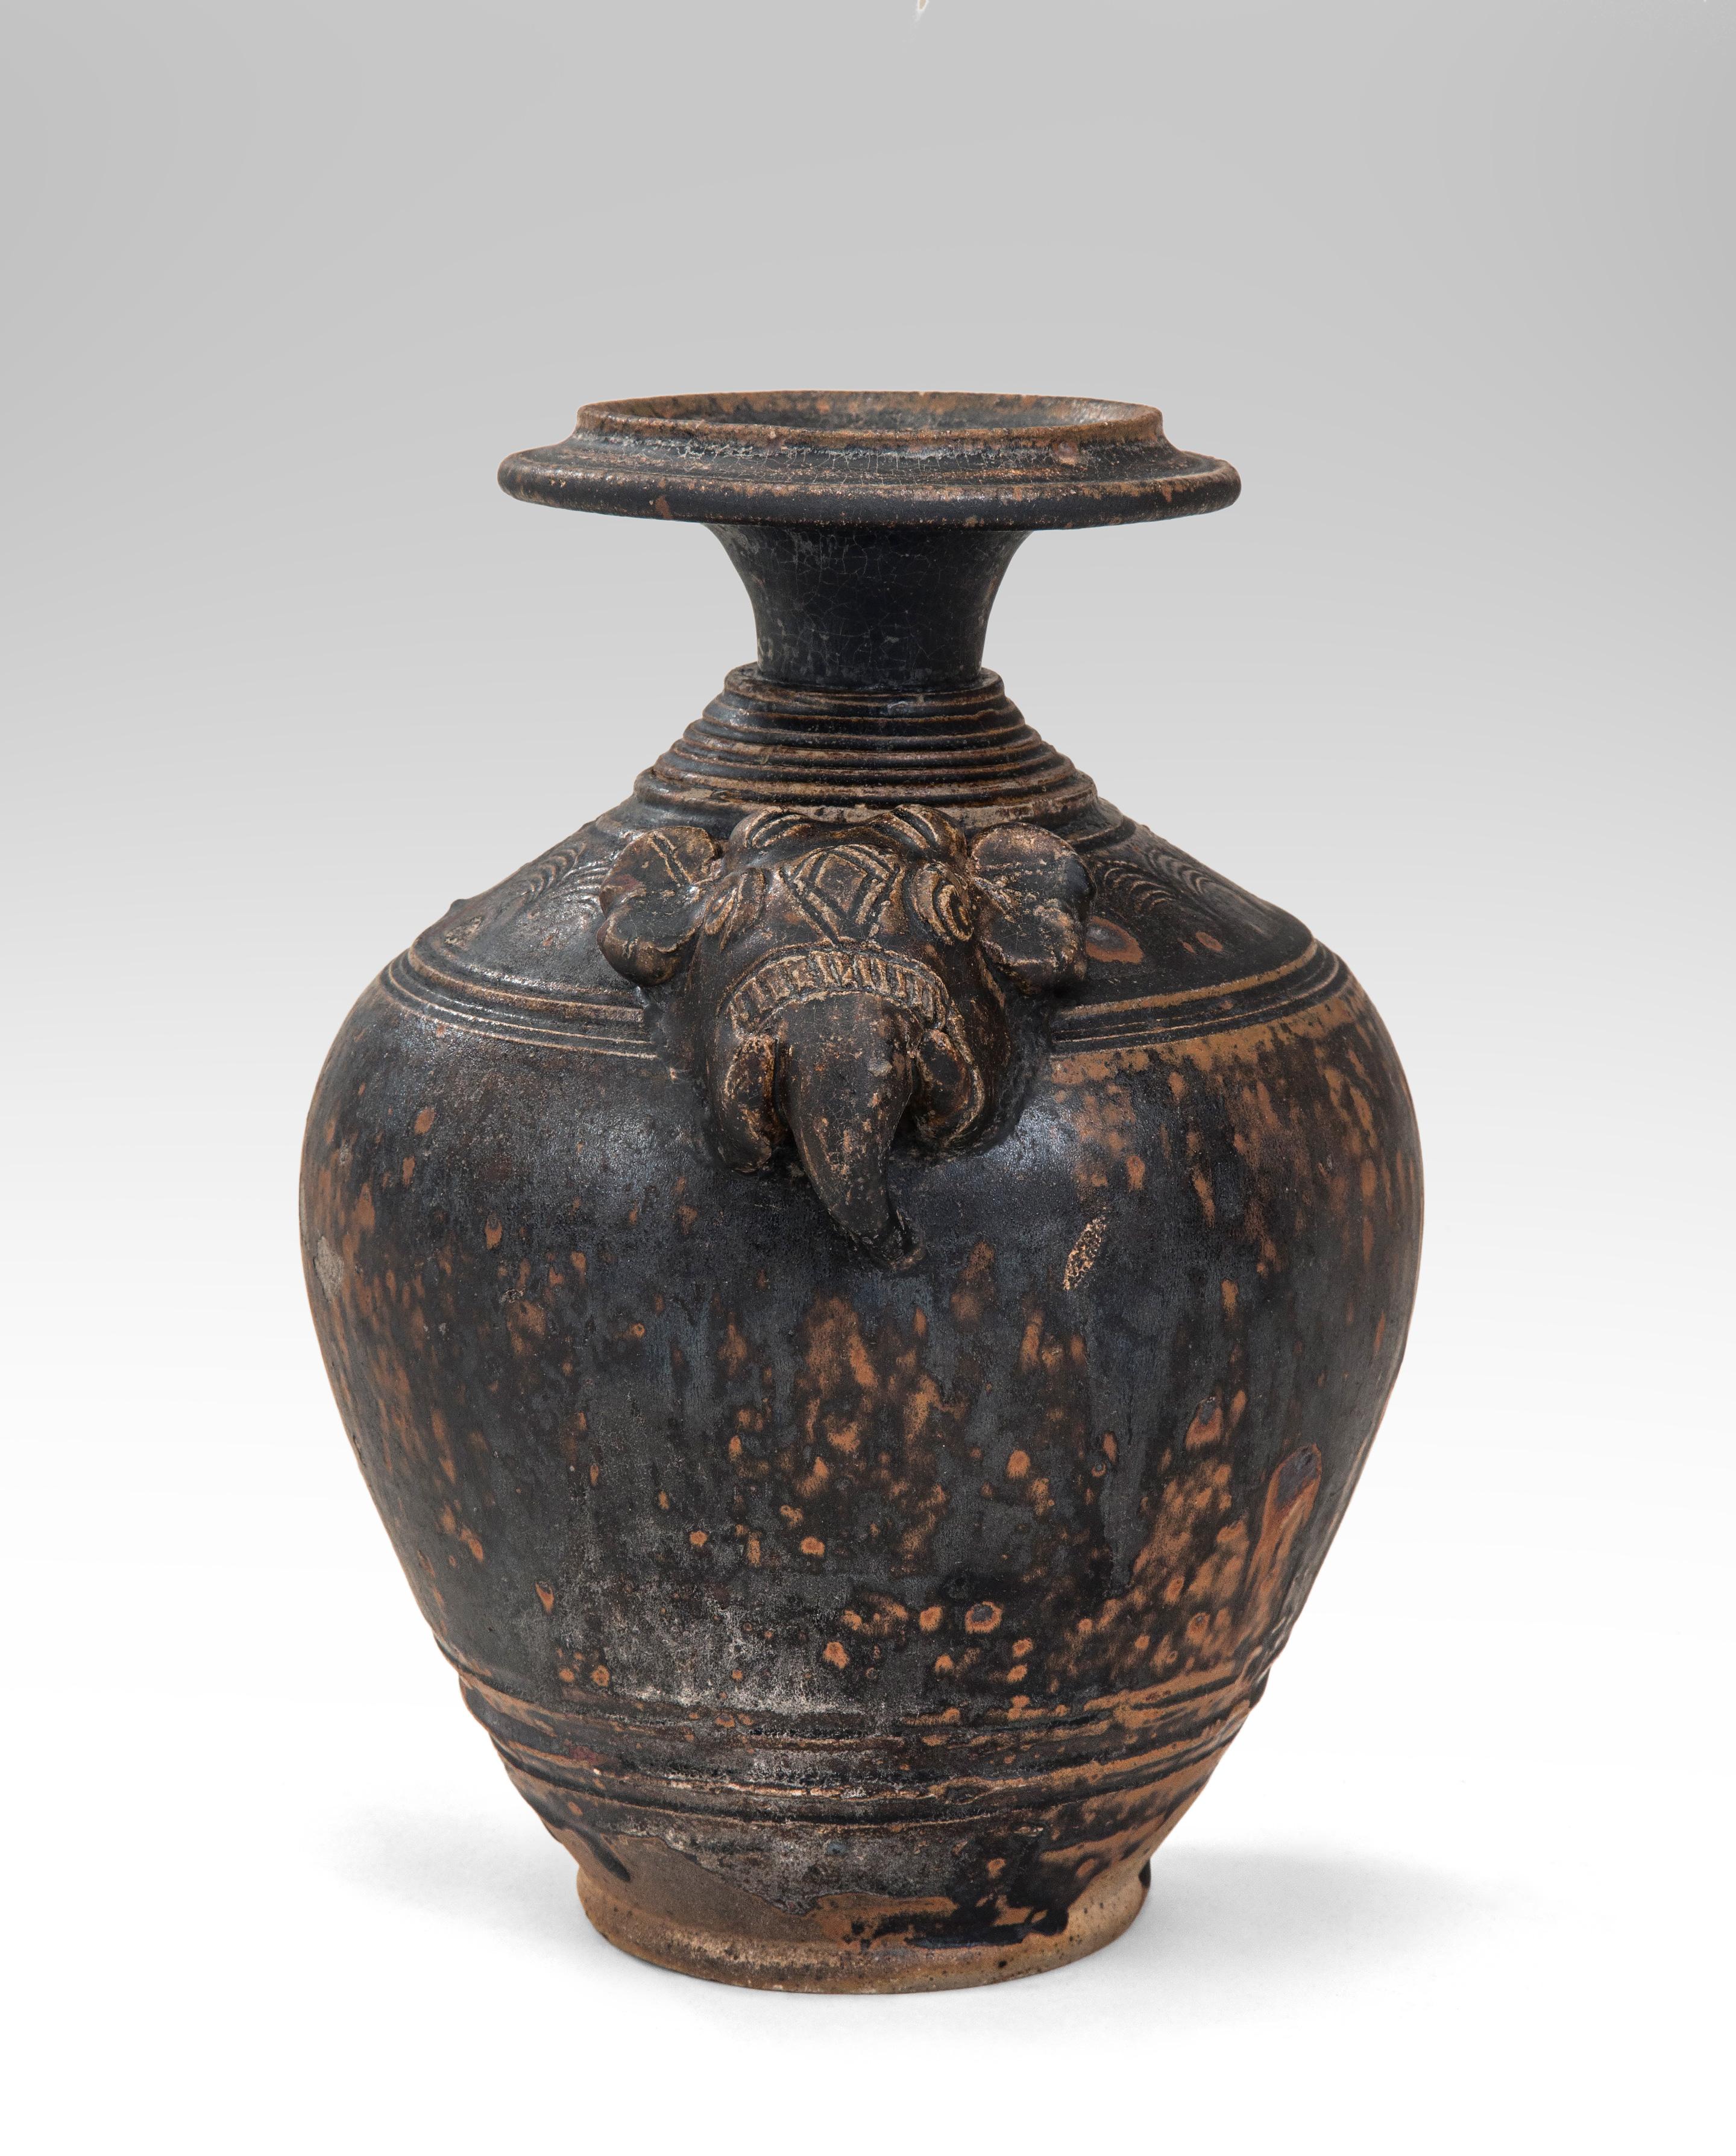 Rare Khmer Elephant Mask Earthenware Vase
Cambodian, 11th Century
The rich, dark-brown drip glaze and the expressive elephant head make this an outstanding example of early Khmer ceramics. The flaring mouth, above a multiple banded neck, the